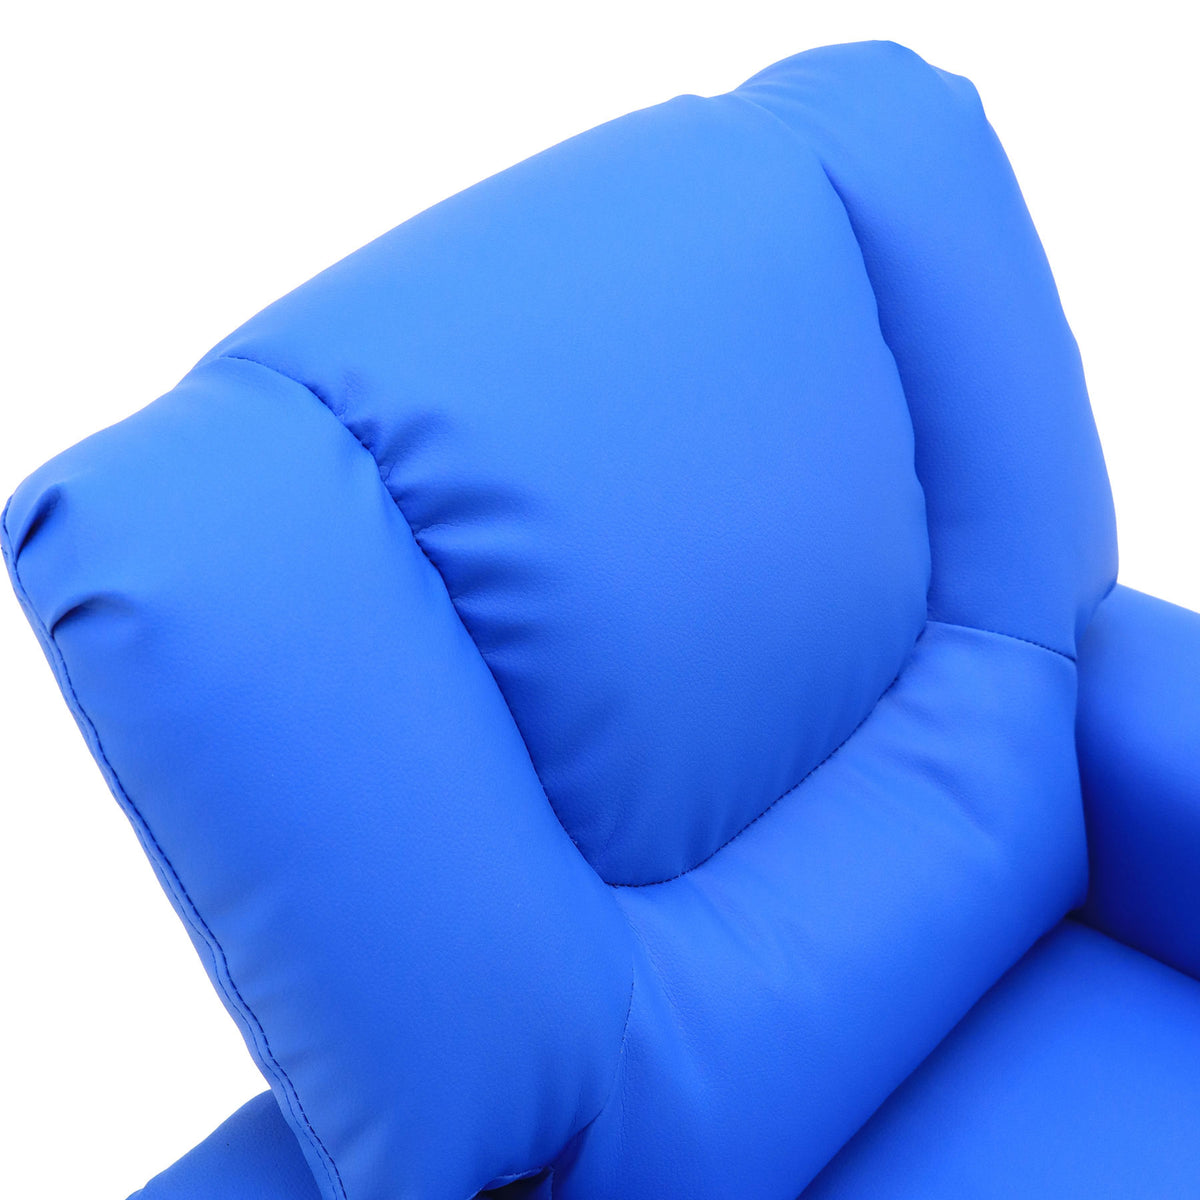 A close up of the cushioned headrest of the blue kids recliner chair.